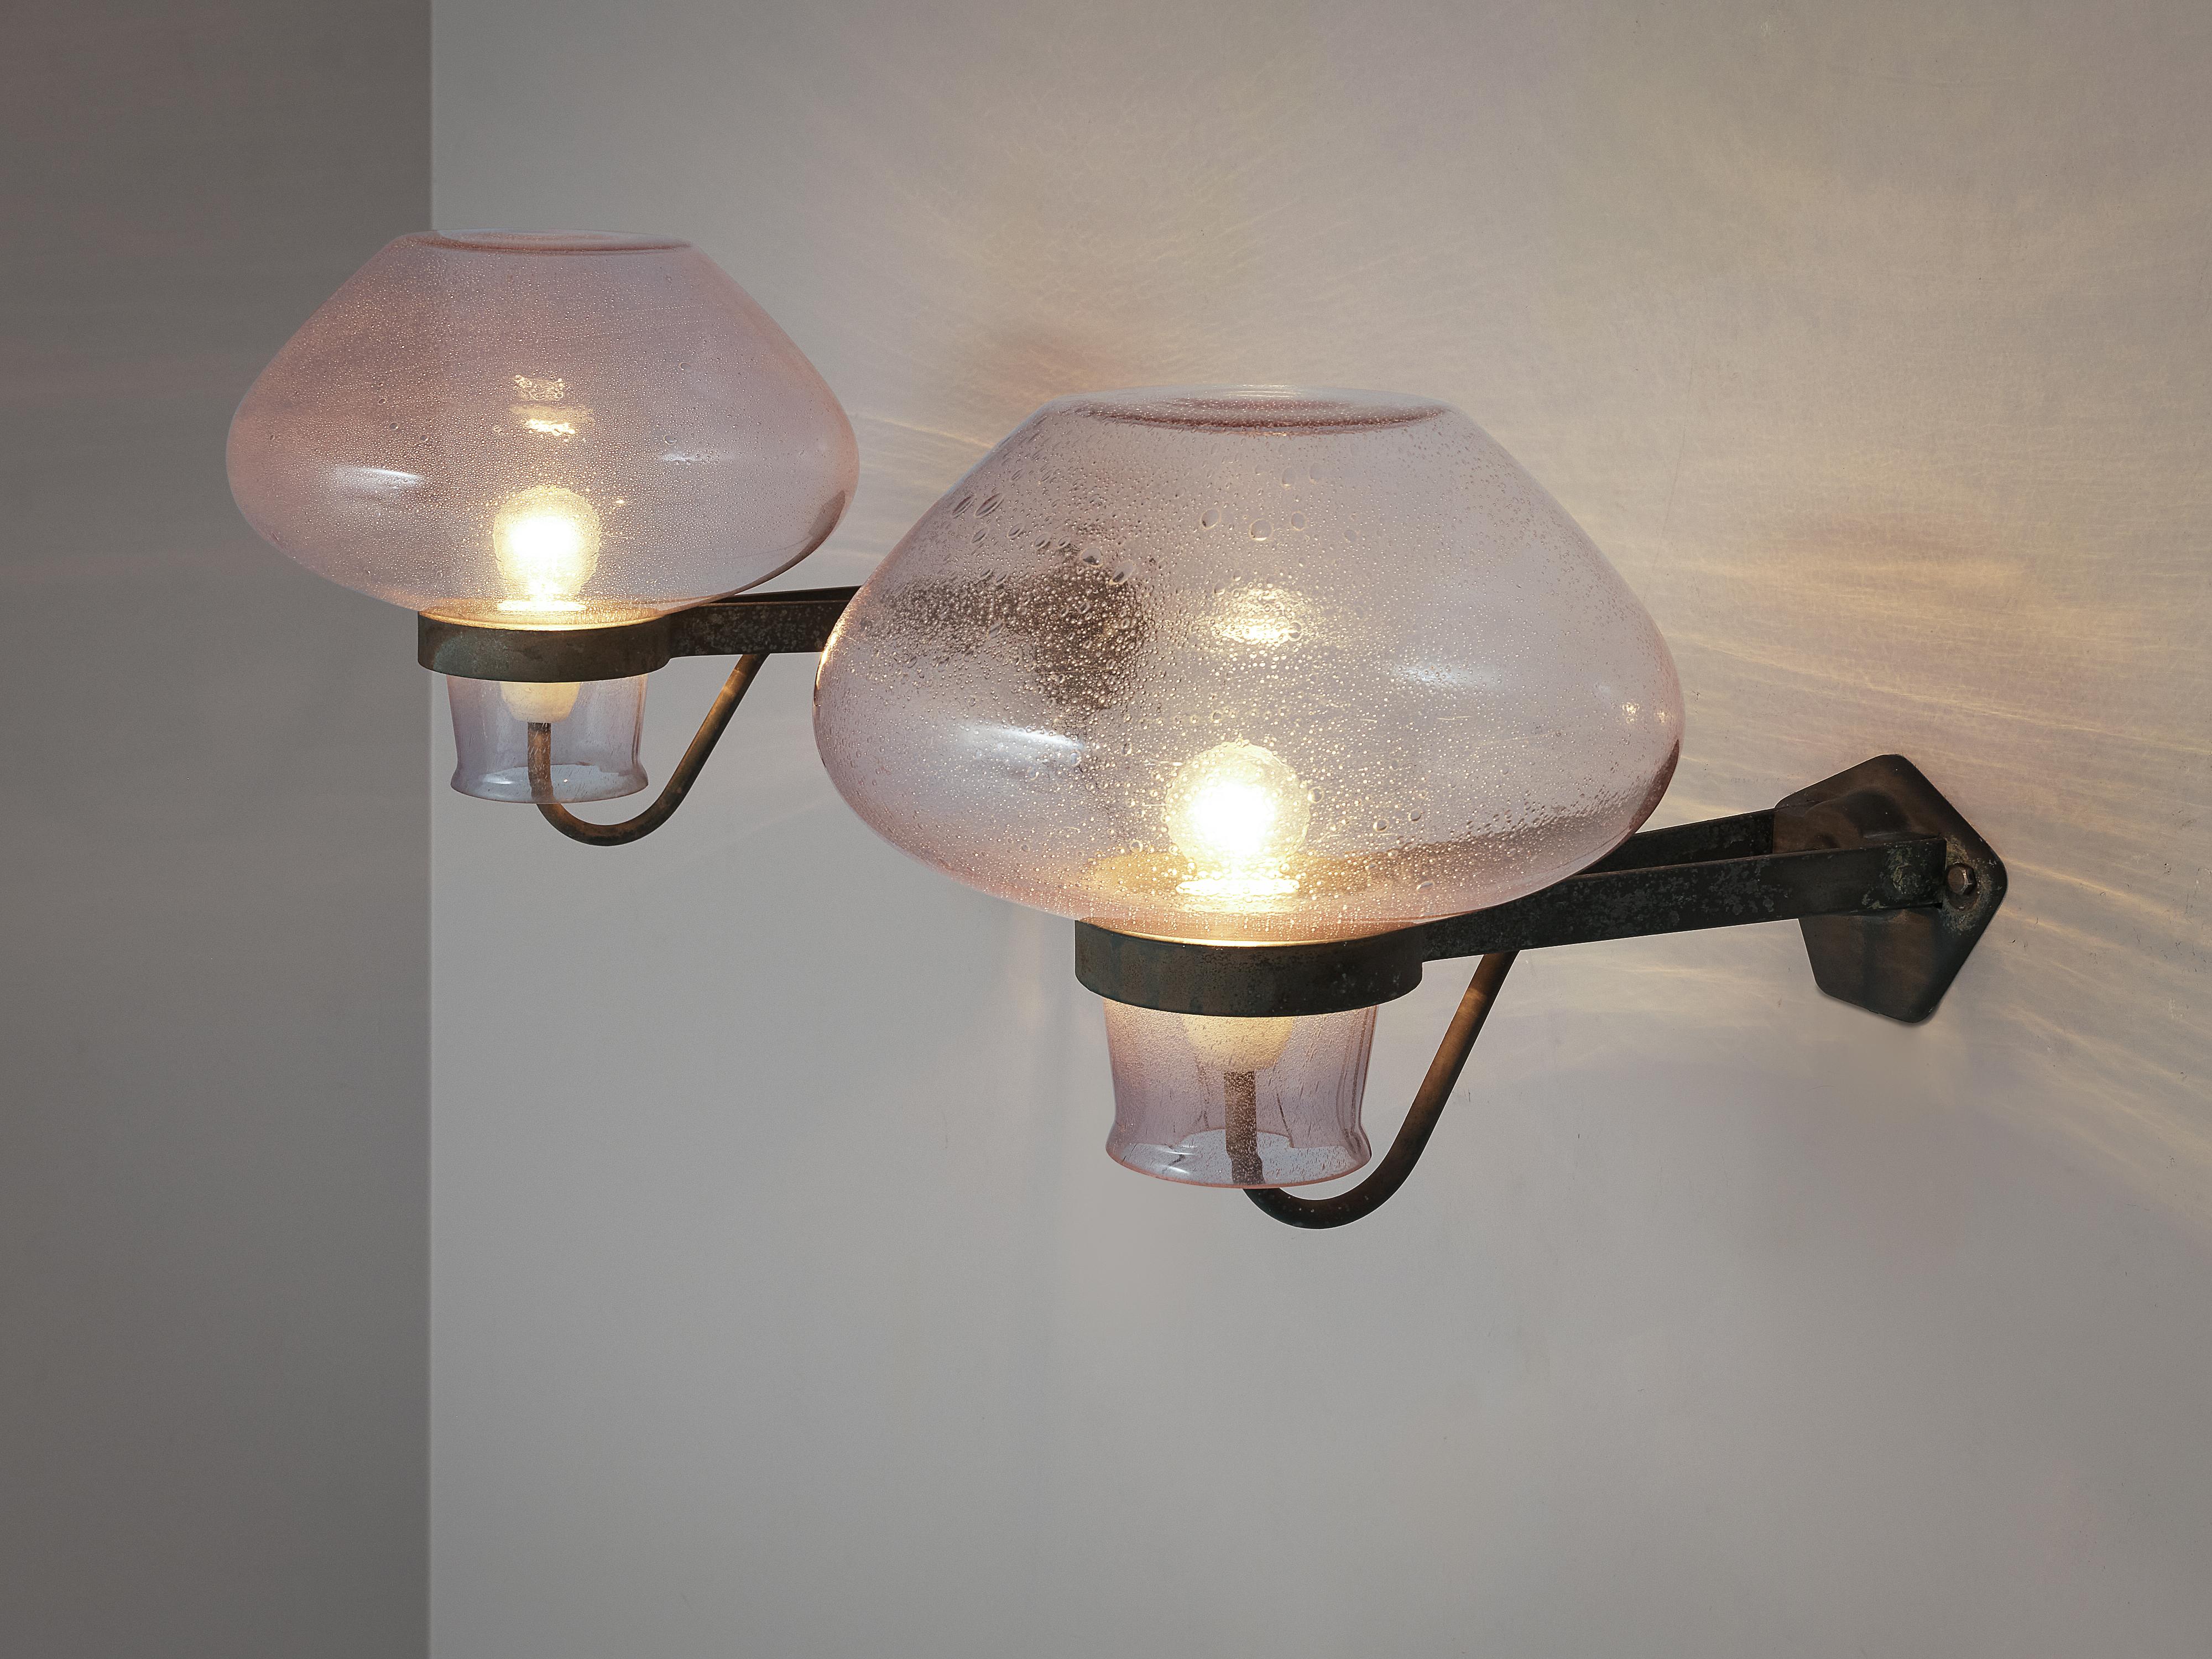 Mid-20th Century Gunnar Asplund Pair of Large Wall Lights Model 641 in Soft Pink Glass, 1930s